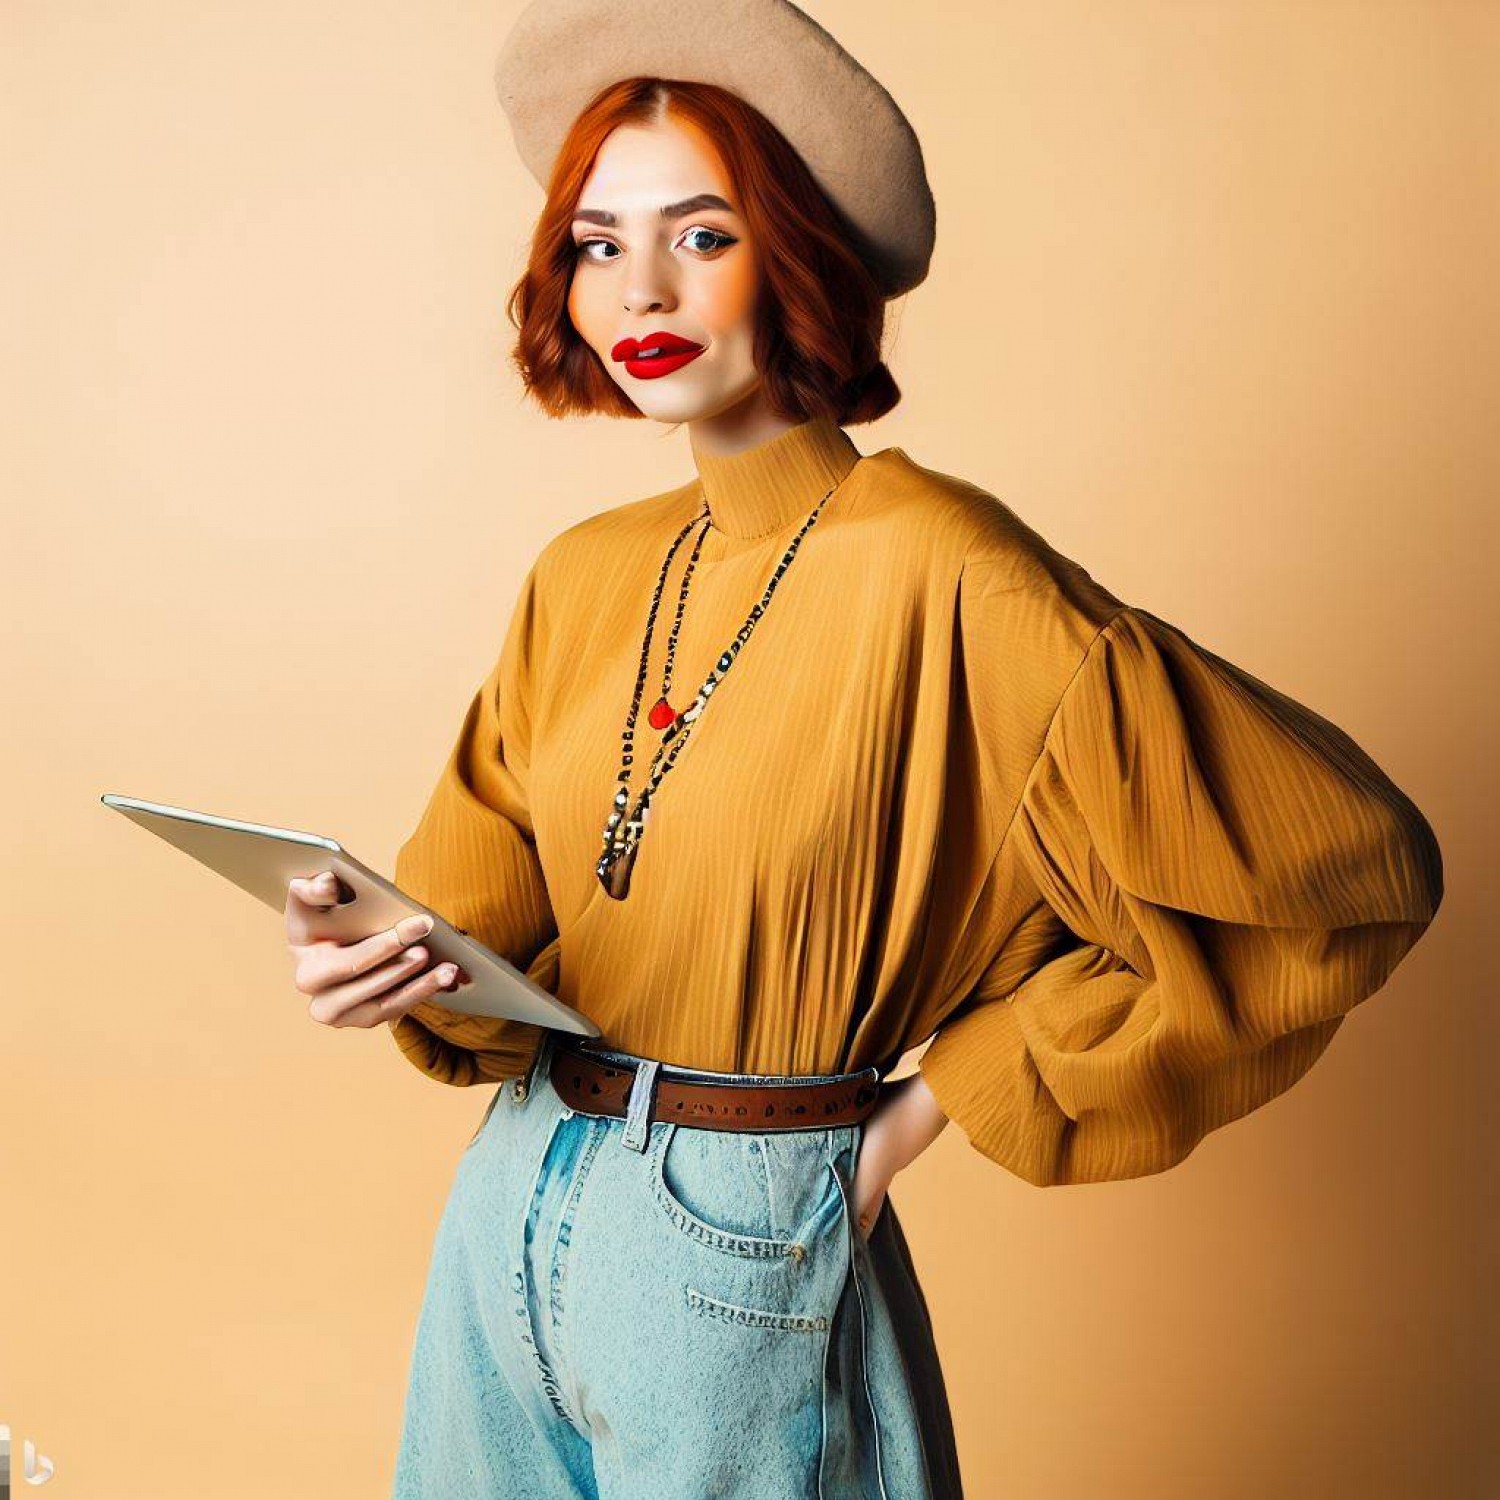 2023 Guide The Best Places to Shop for Vintage Fashion Online